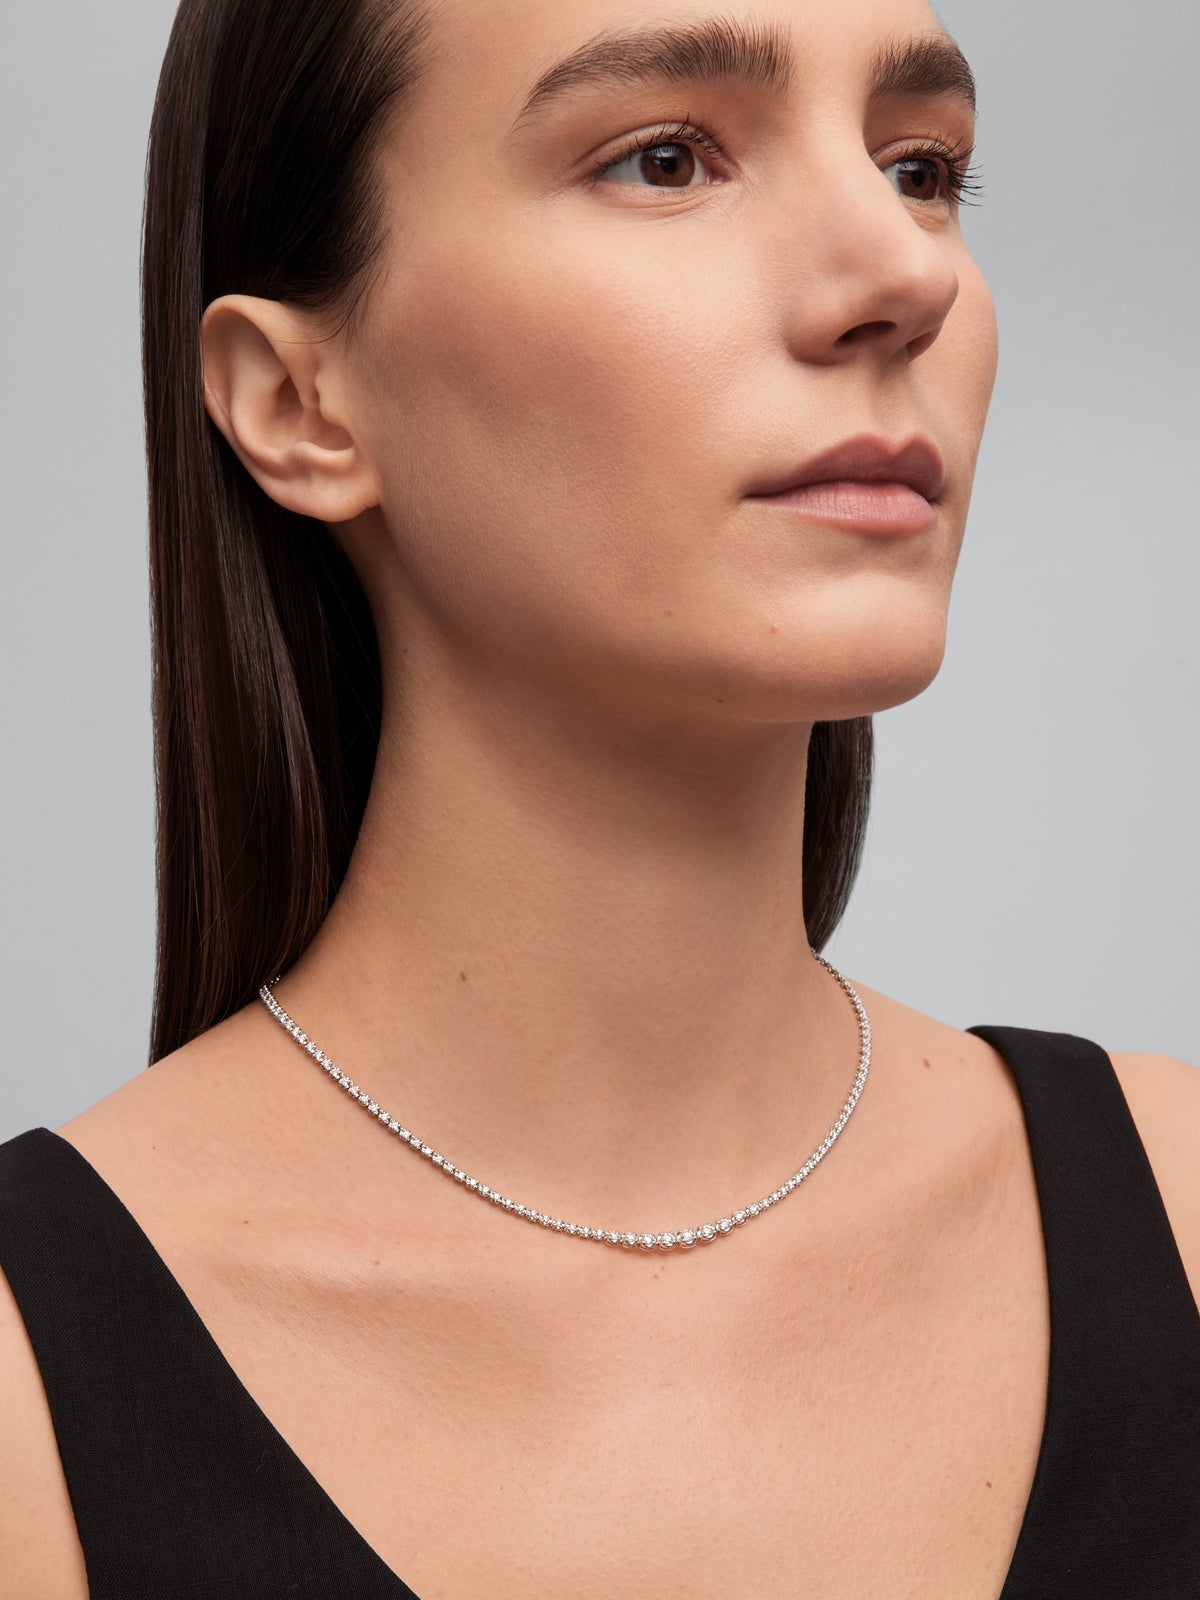 18K white gold rivière necklace with 134 brilliant-cut diamonds with a total of 2.86 cts